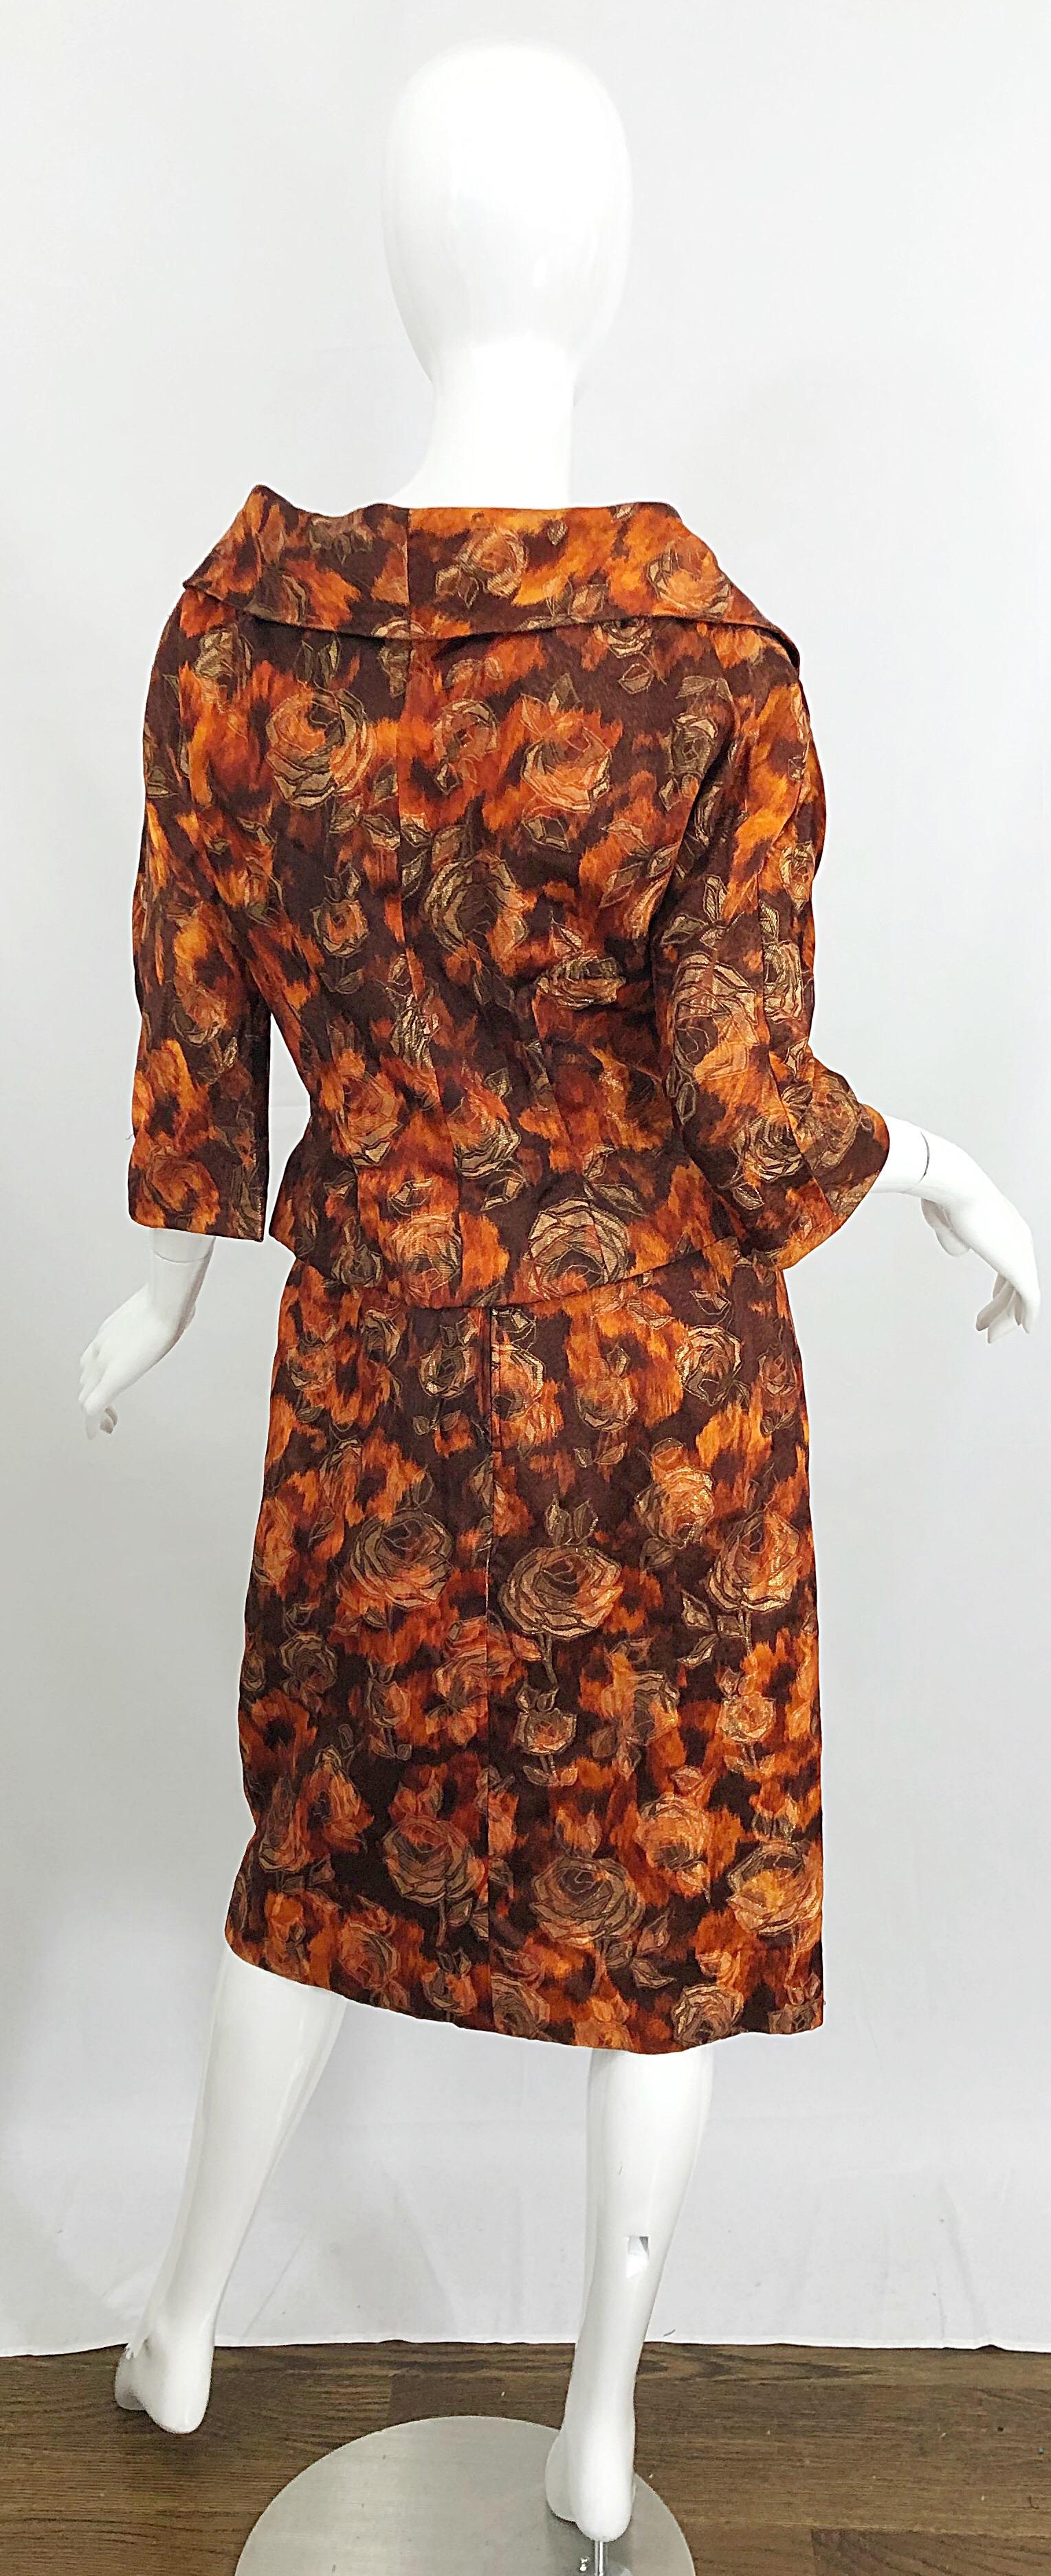 Women's Beautiful 1950s Rose Print Silk Brocade Brown Orange Gold 50s Dress and Jacket For Sale